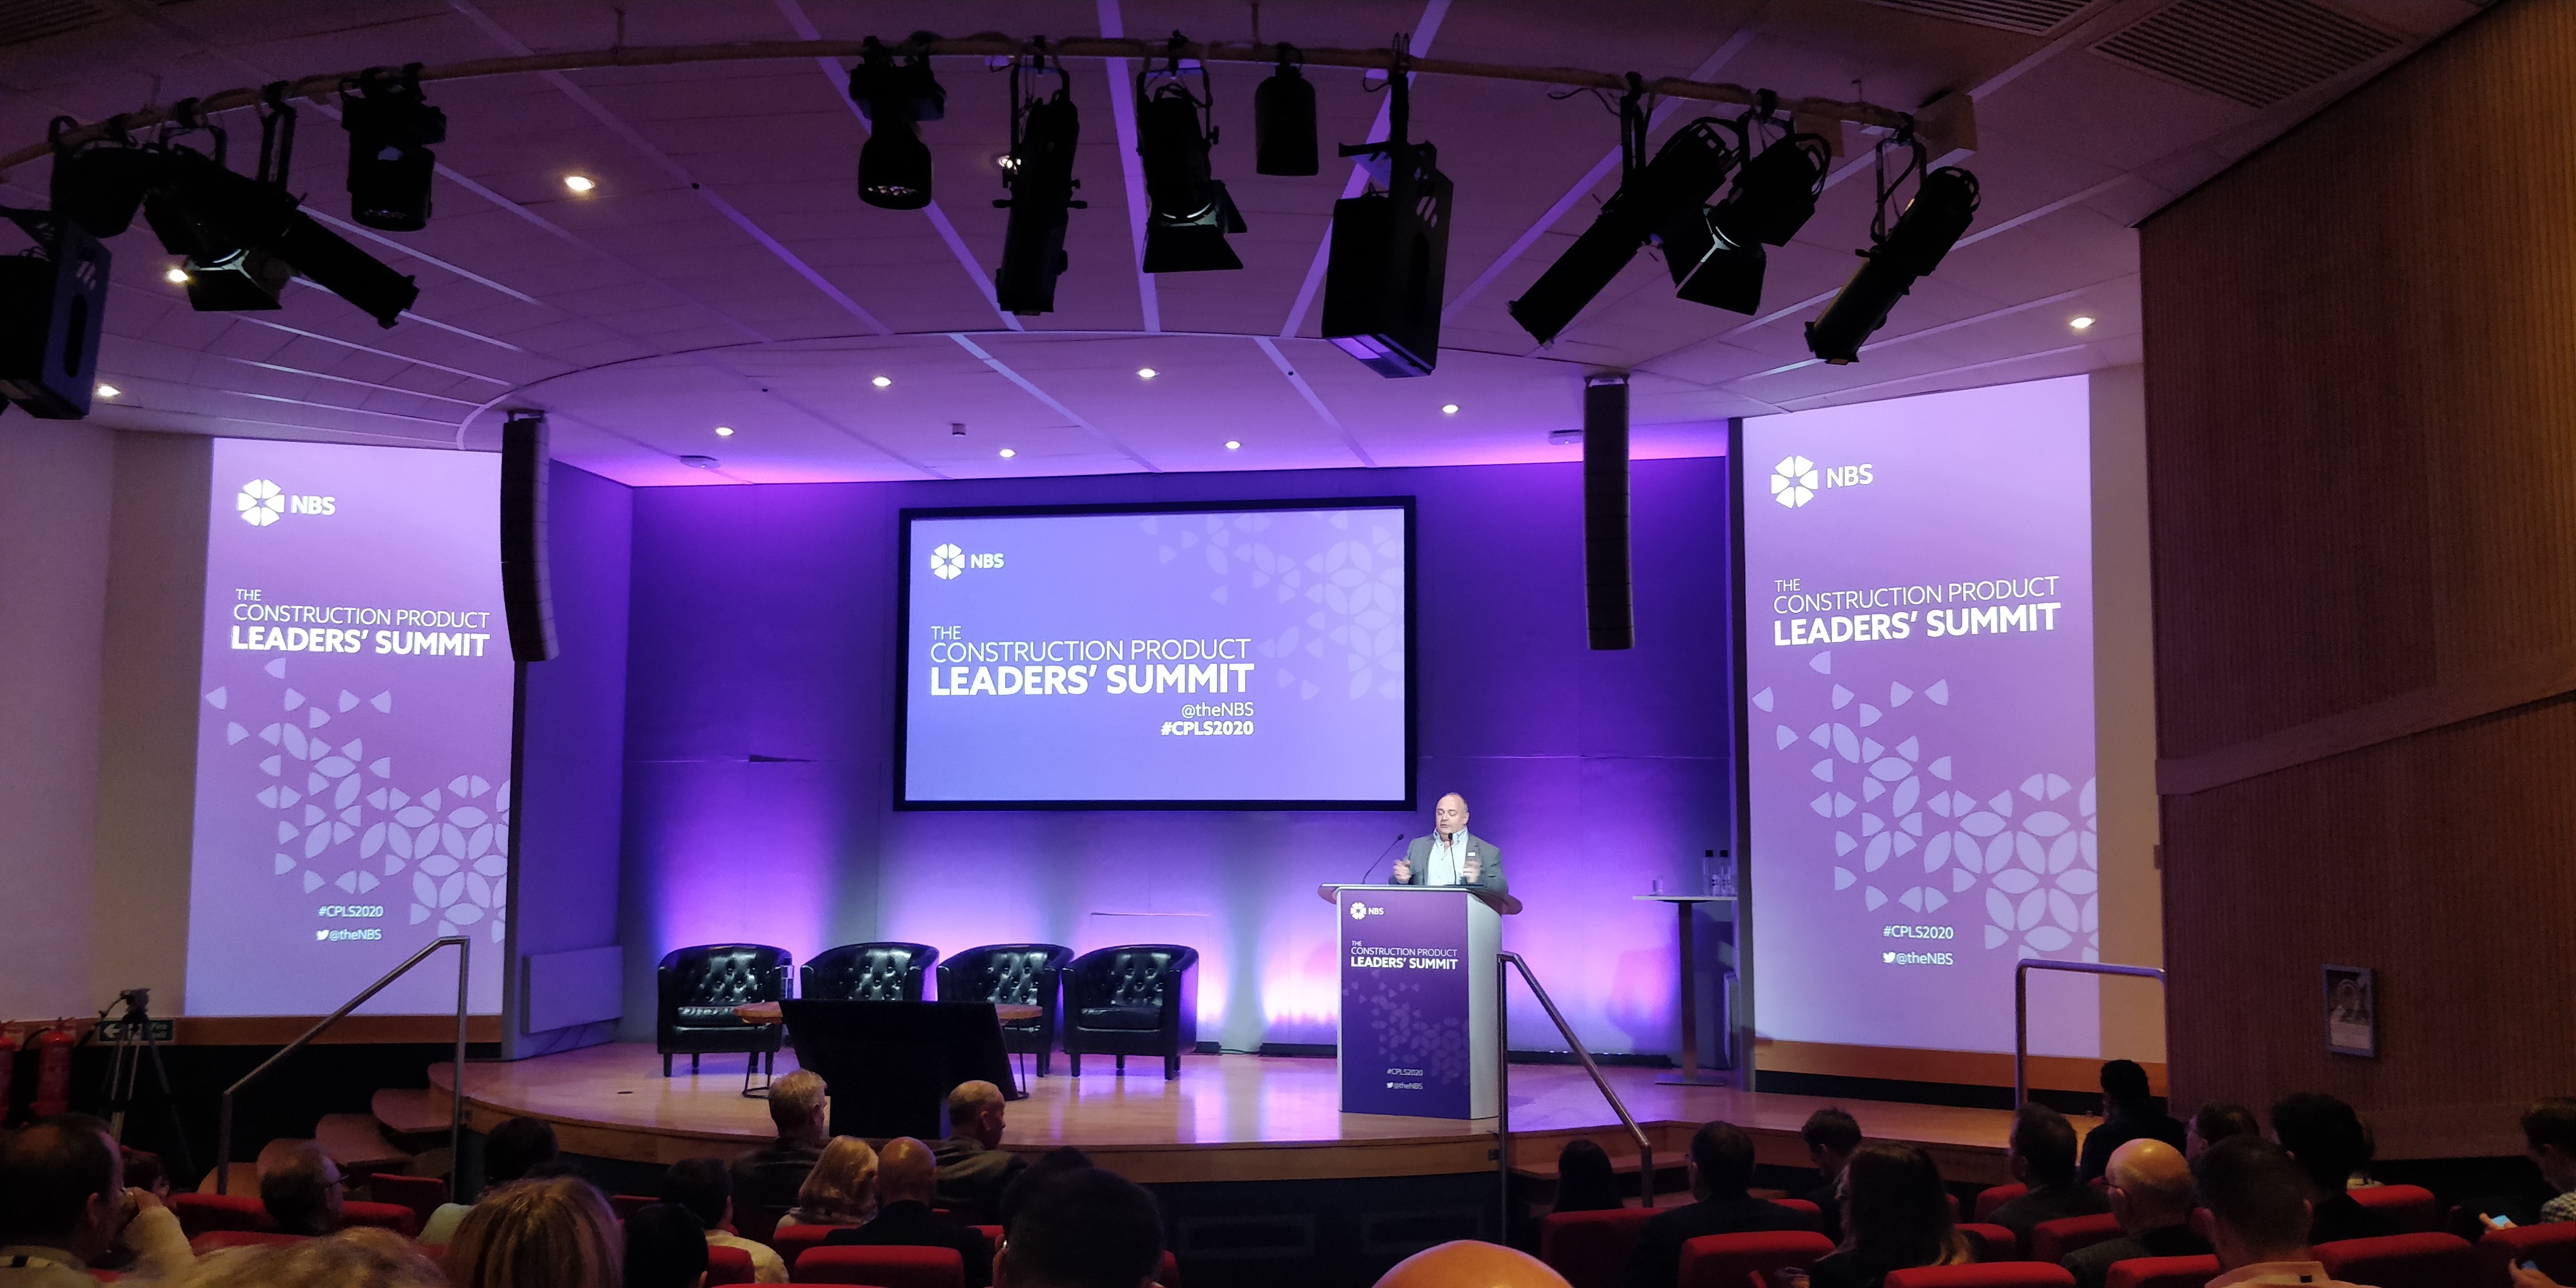 NBS Construction product leaders summit 2020